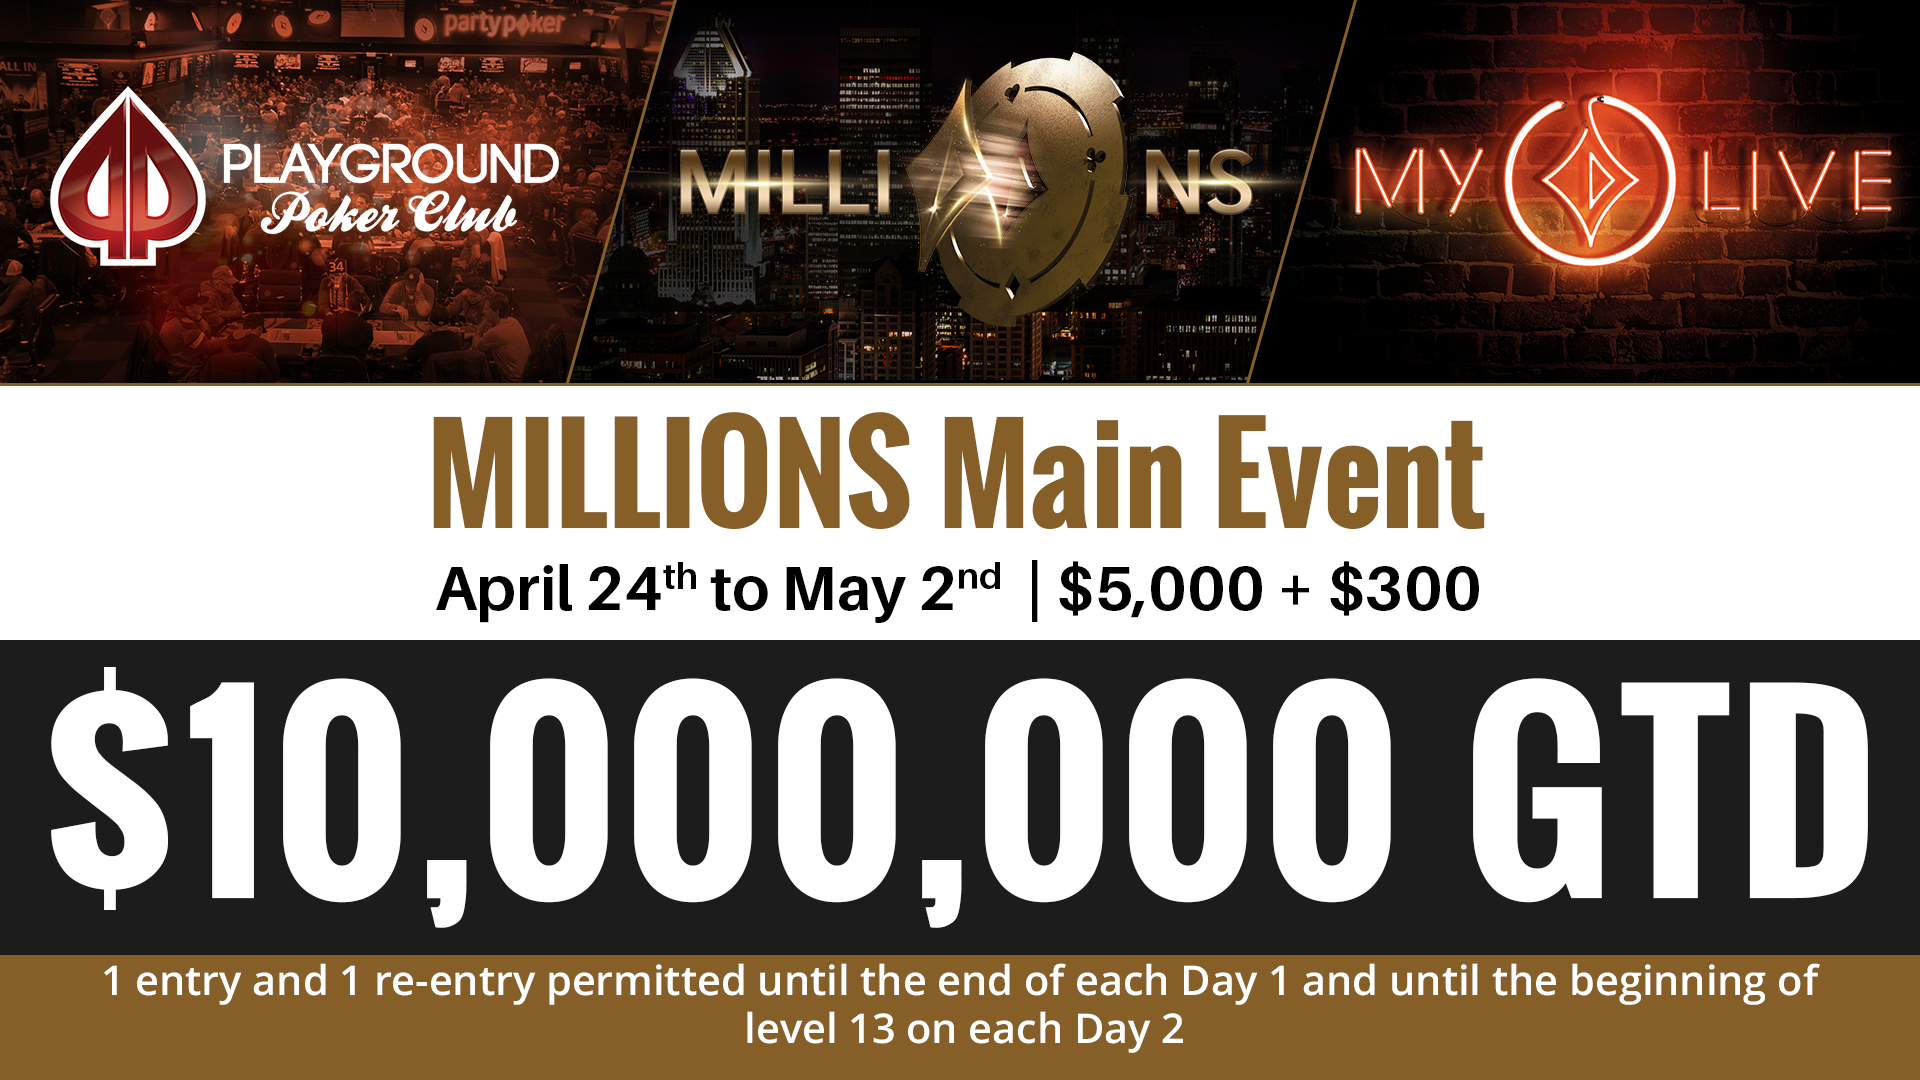 Next: Day 4 in the MILLIONS Main Event